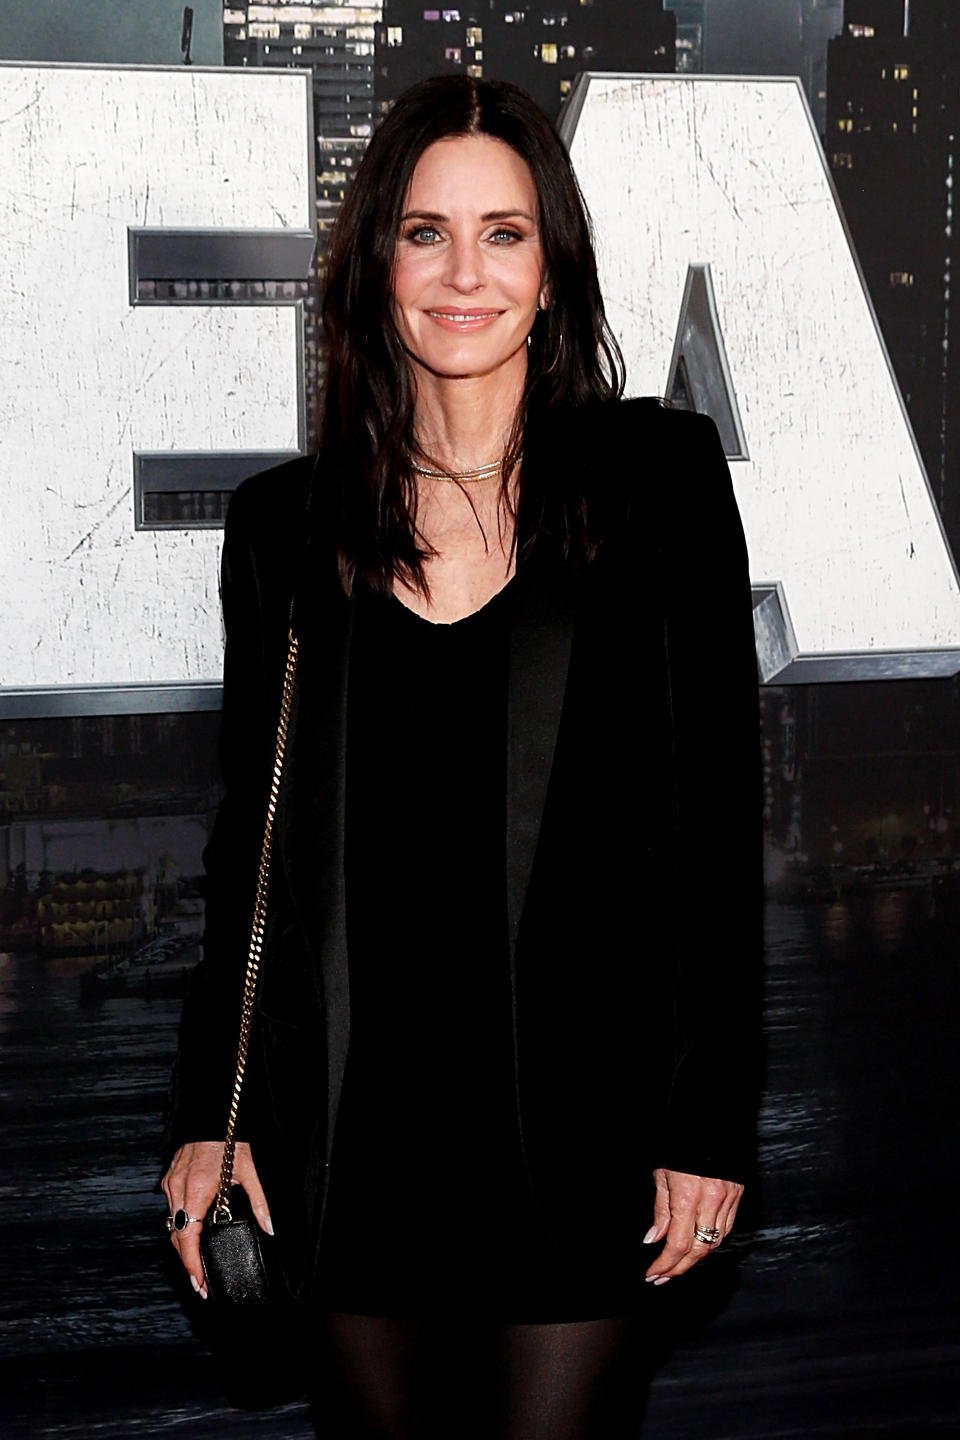 Courteney standing before a "Z" sign, wearing a black blazer over a sheer top, smiling